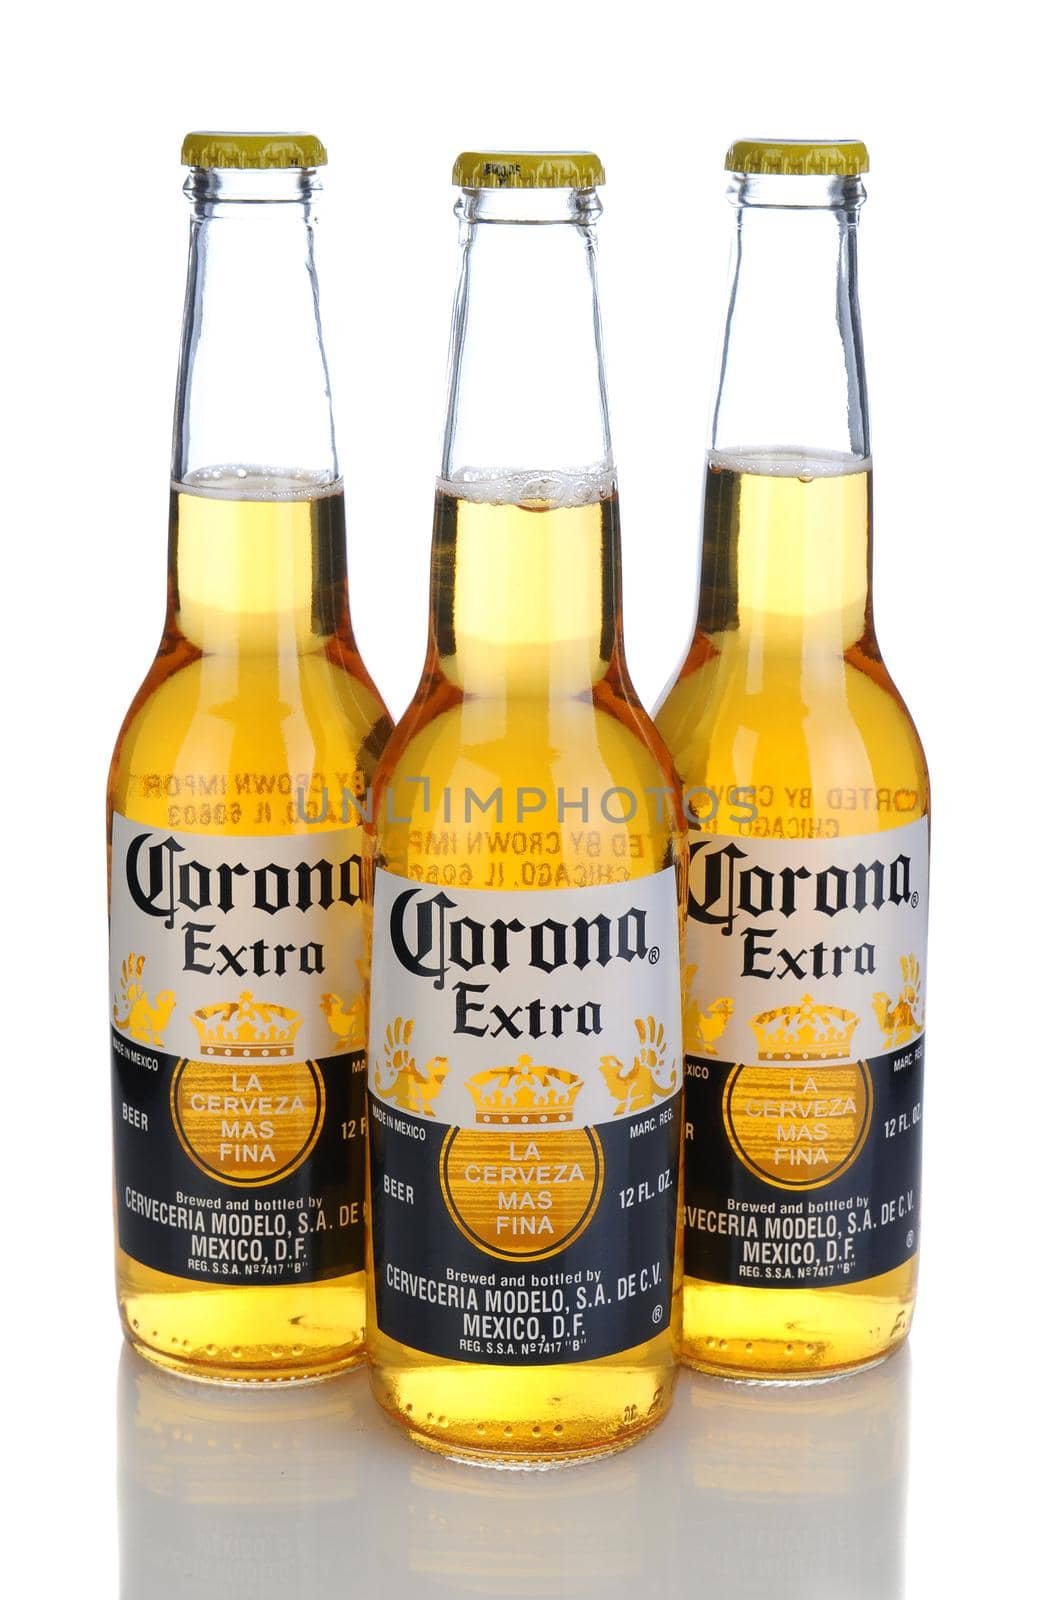 IRVINE, CA - January 11, 2013: Photo of a 12 ounce bottle of Corona Extra Beer. Corona, produced by Grupo Modelo with Anheuser Busch InBev, is the most popular imported beer in the US.